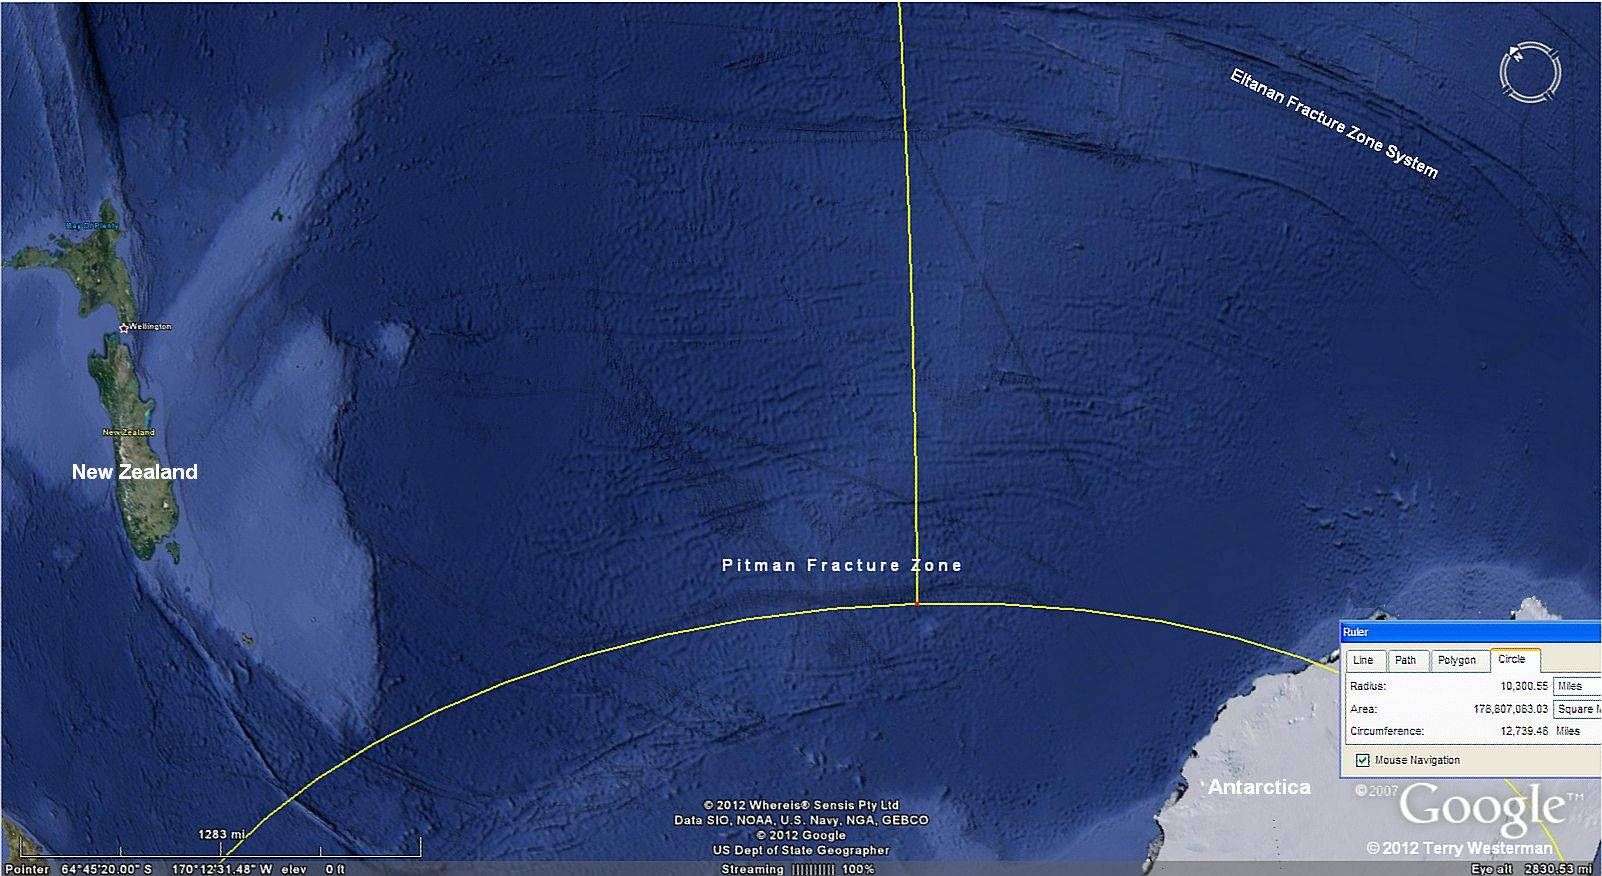 The Pitman Fracture Zone and the Baffin Island Impact 10,300 mile radius seismic circle